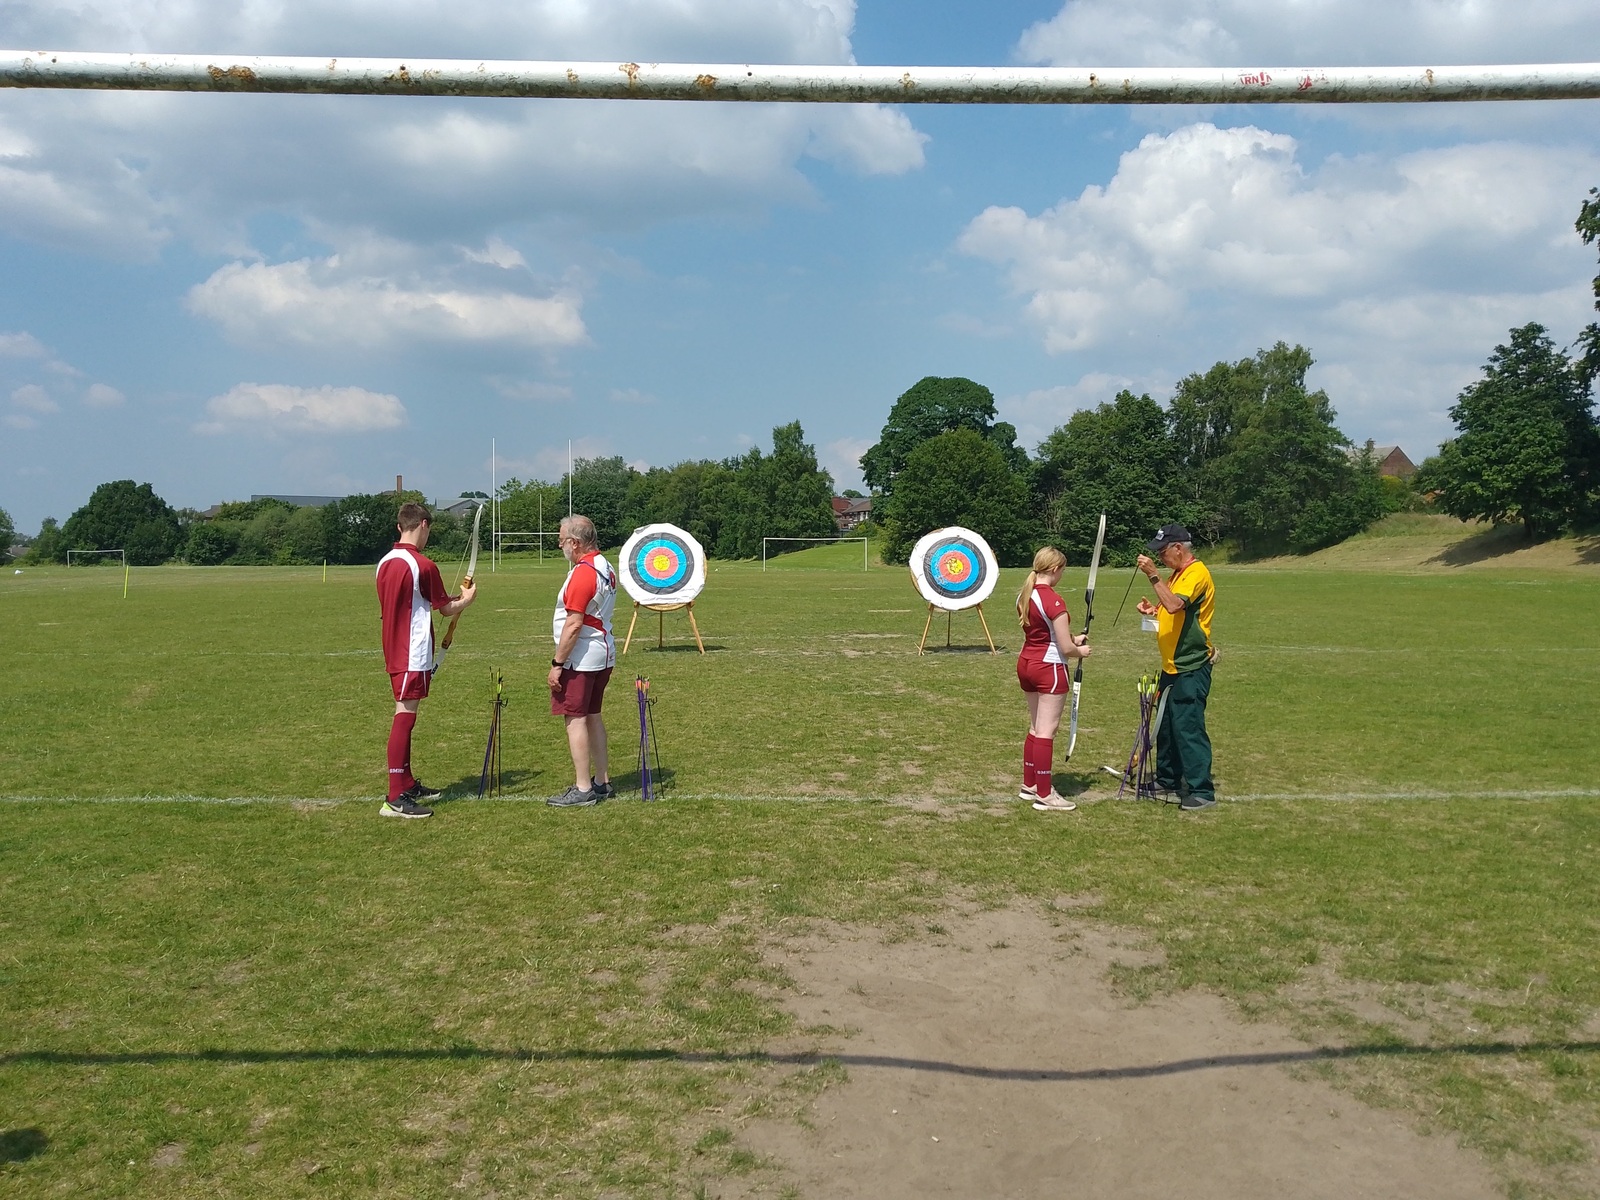 Students trying archery during a PE lesson